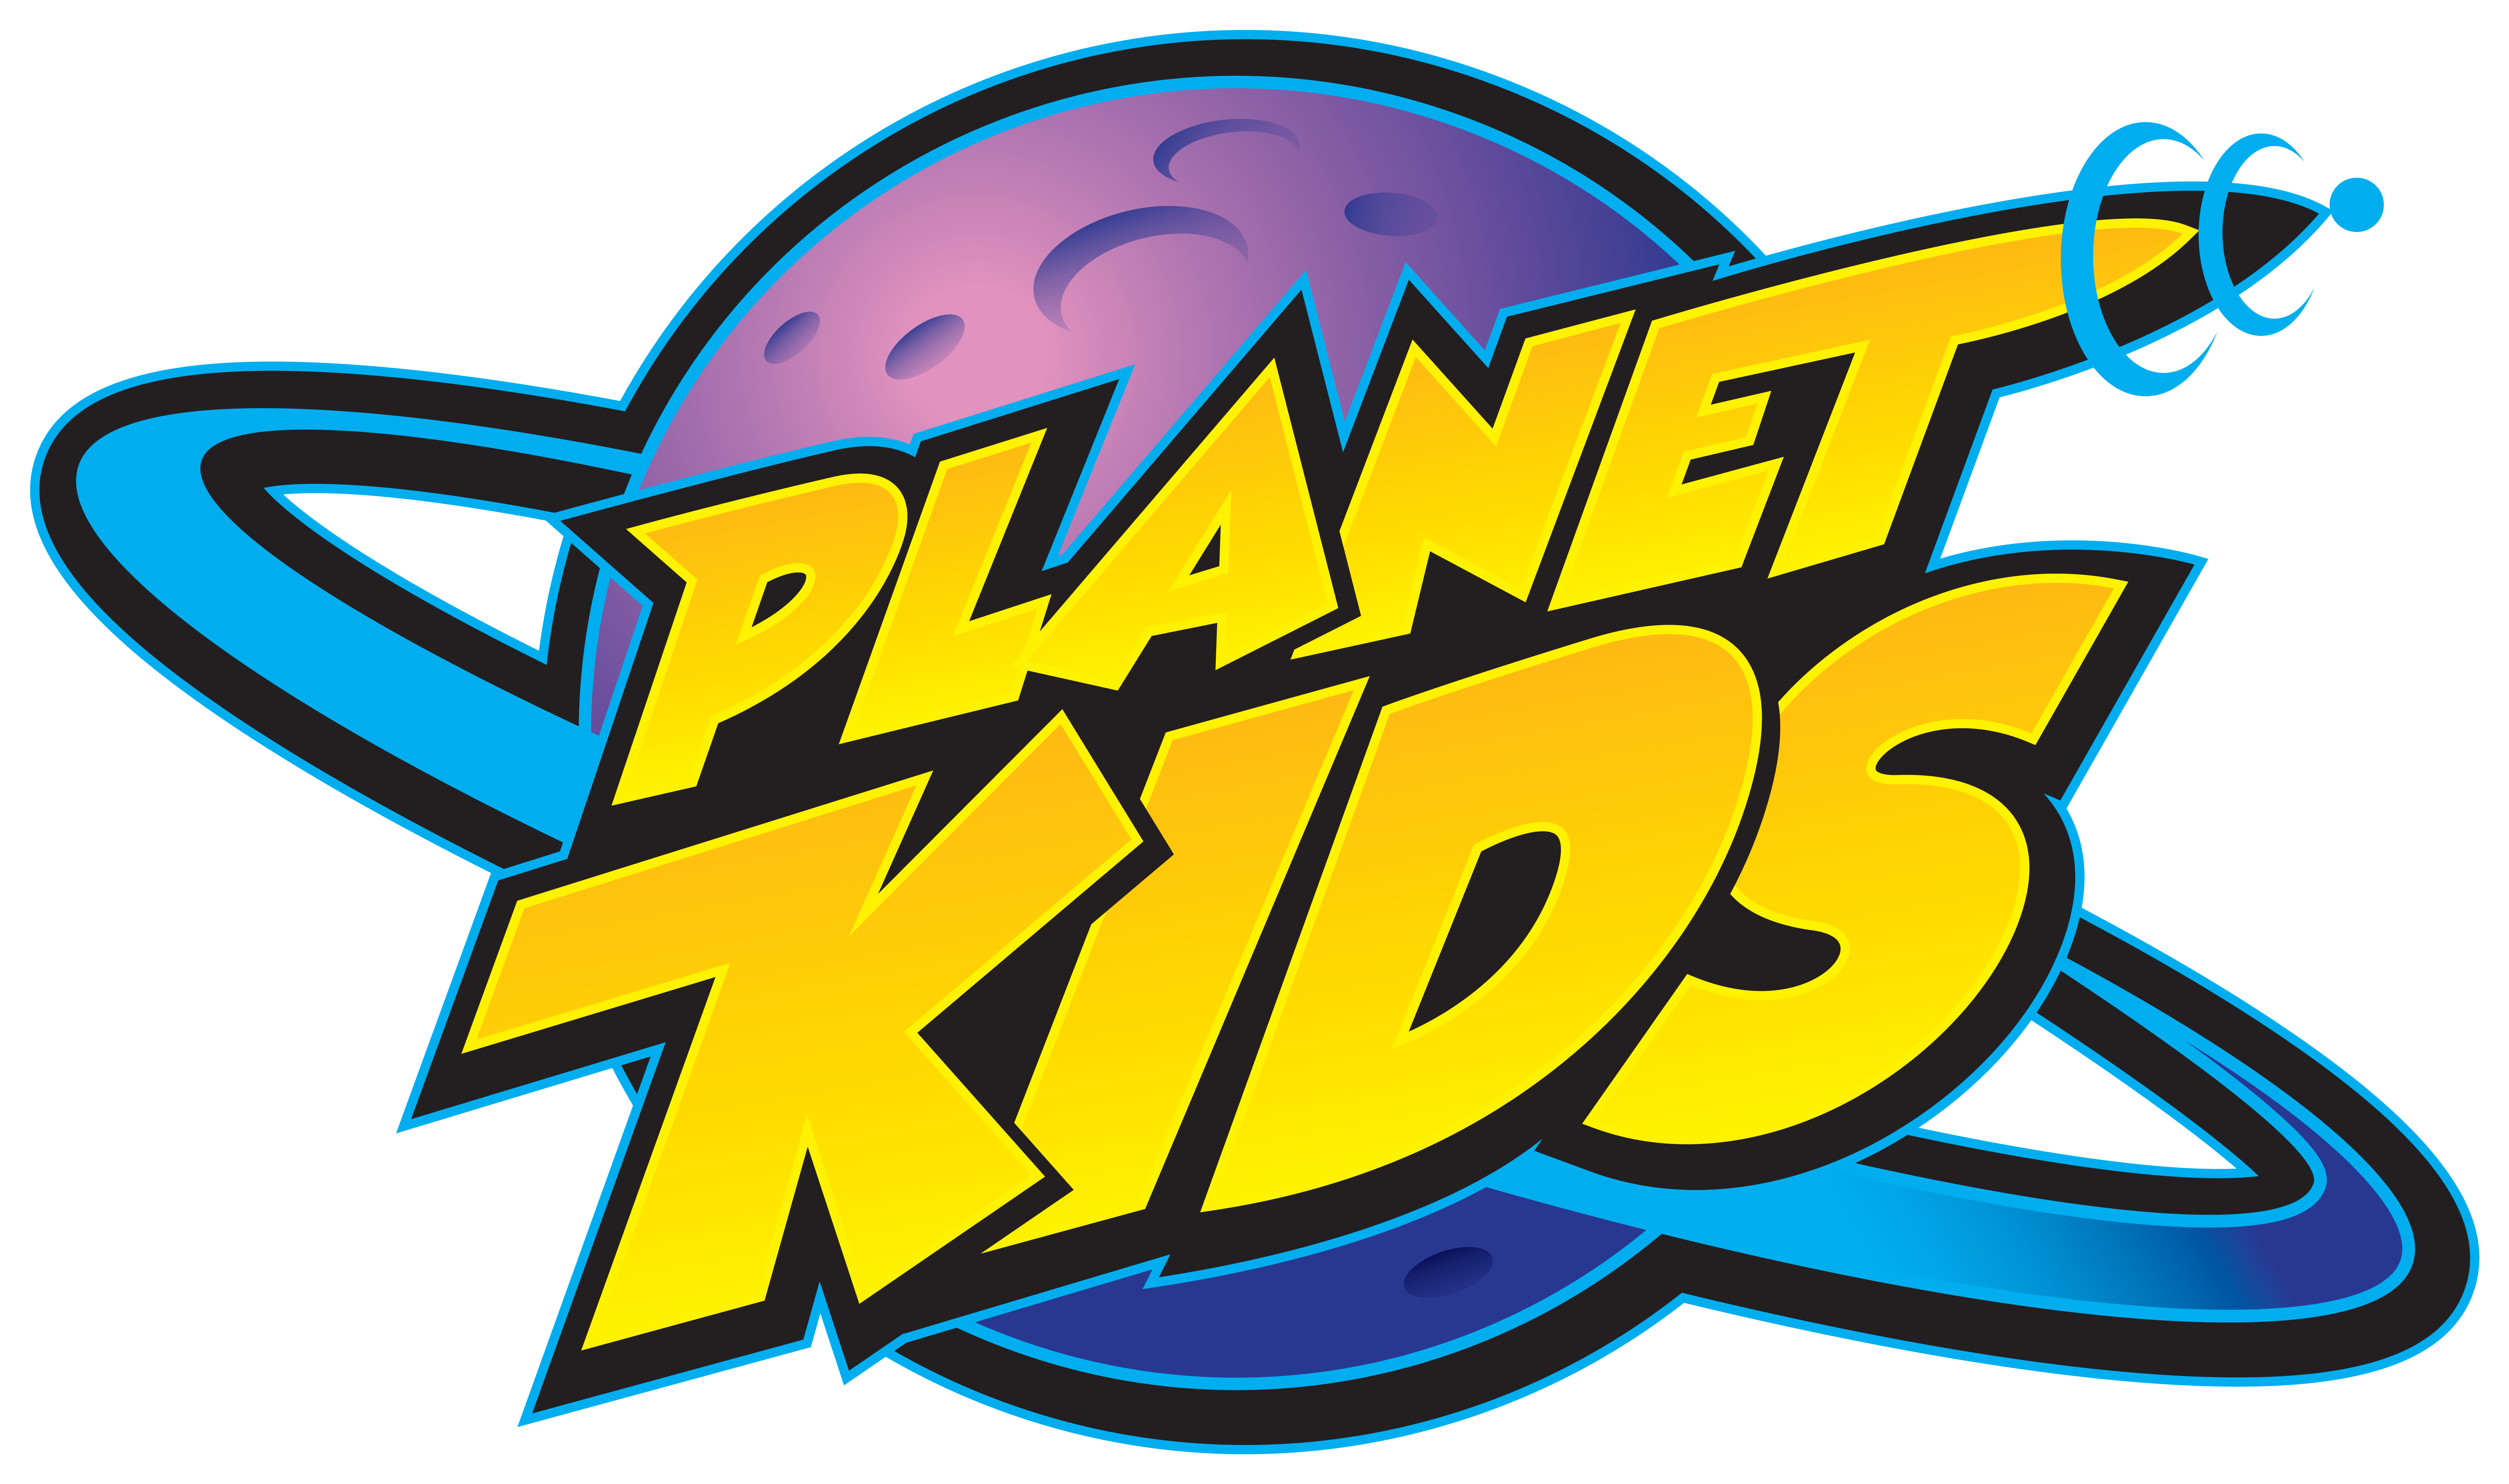 Planet Kids Is The Kids Ministry Here At The House - Planet Kids Christian Preschool (6805x4563)